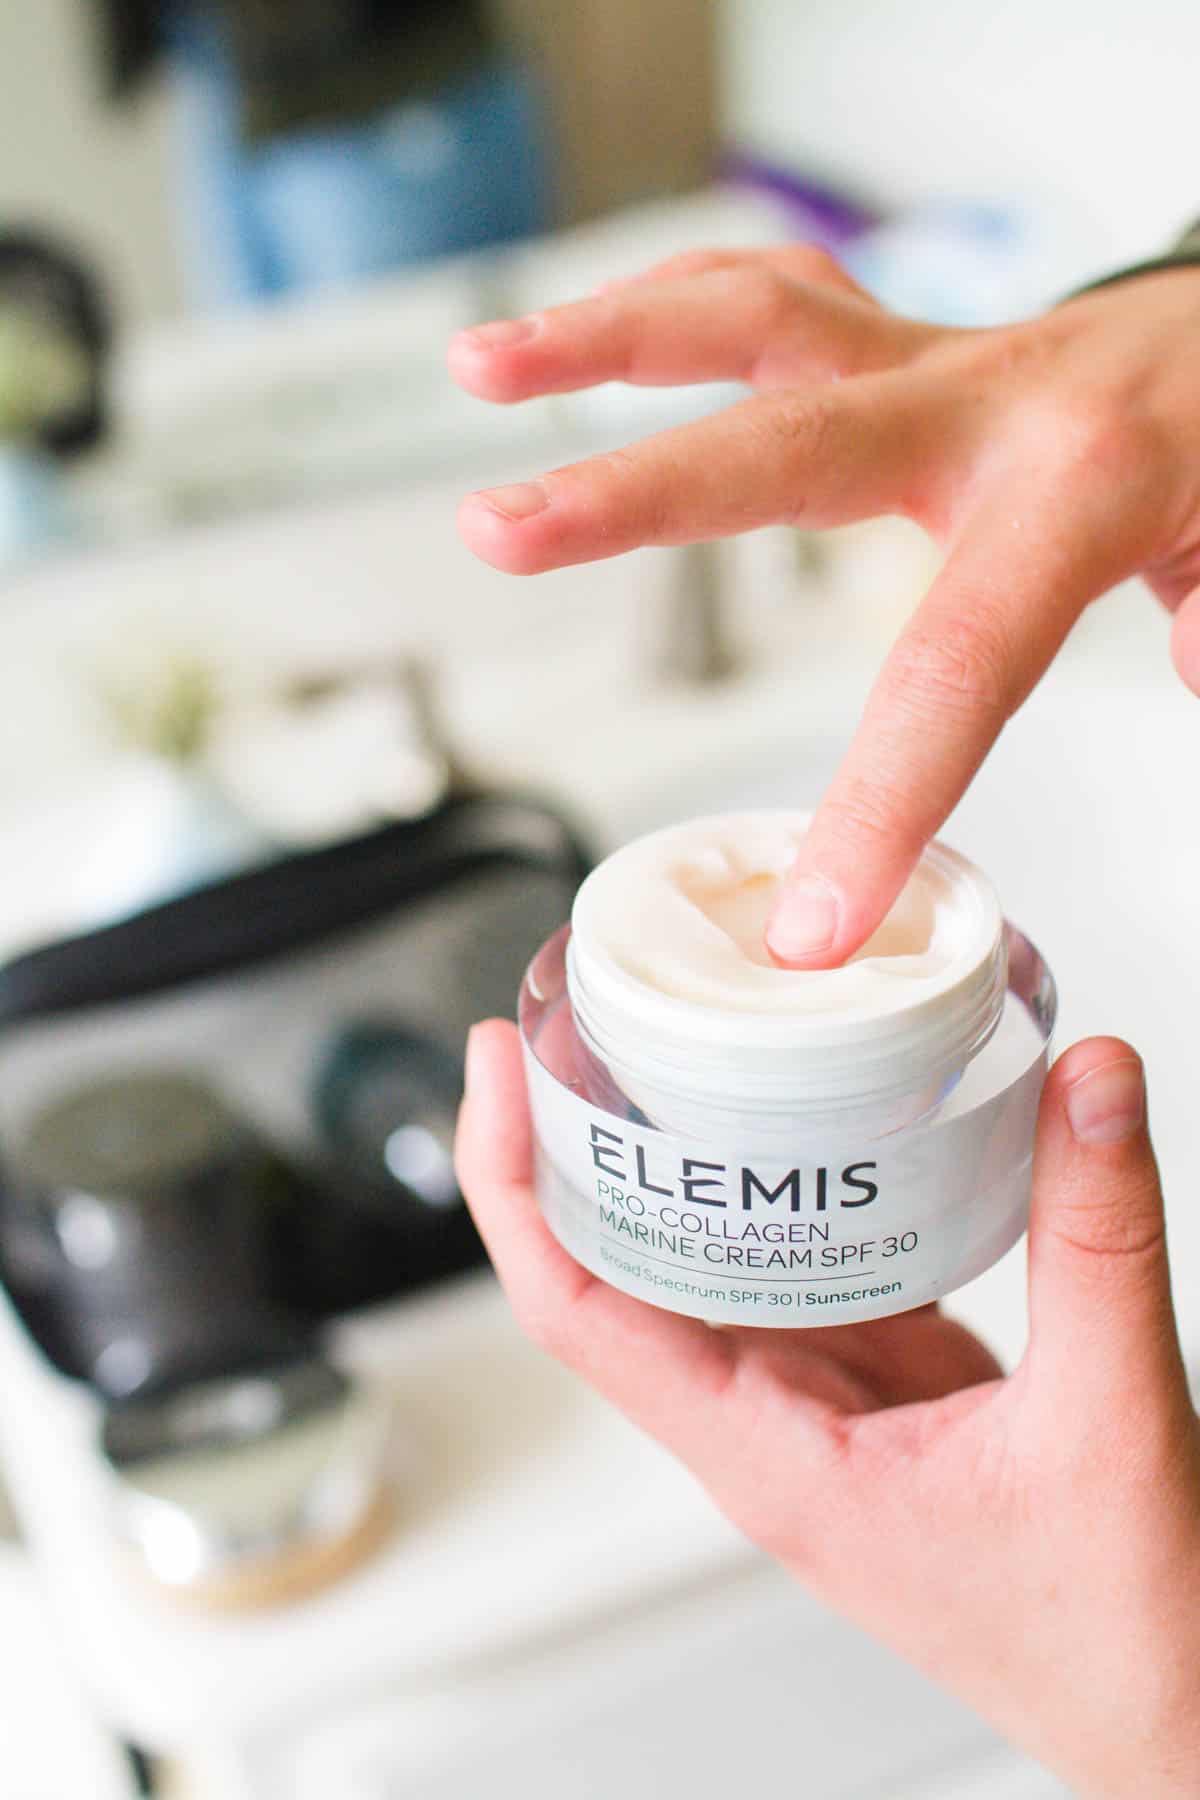 Hands holding a jar of Elemis Pro-Collagen Marine Cream with spf 30 and dipping her finger in.